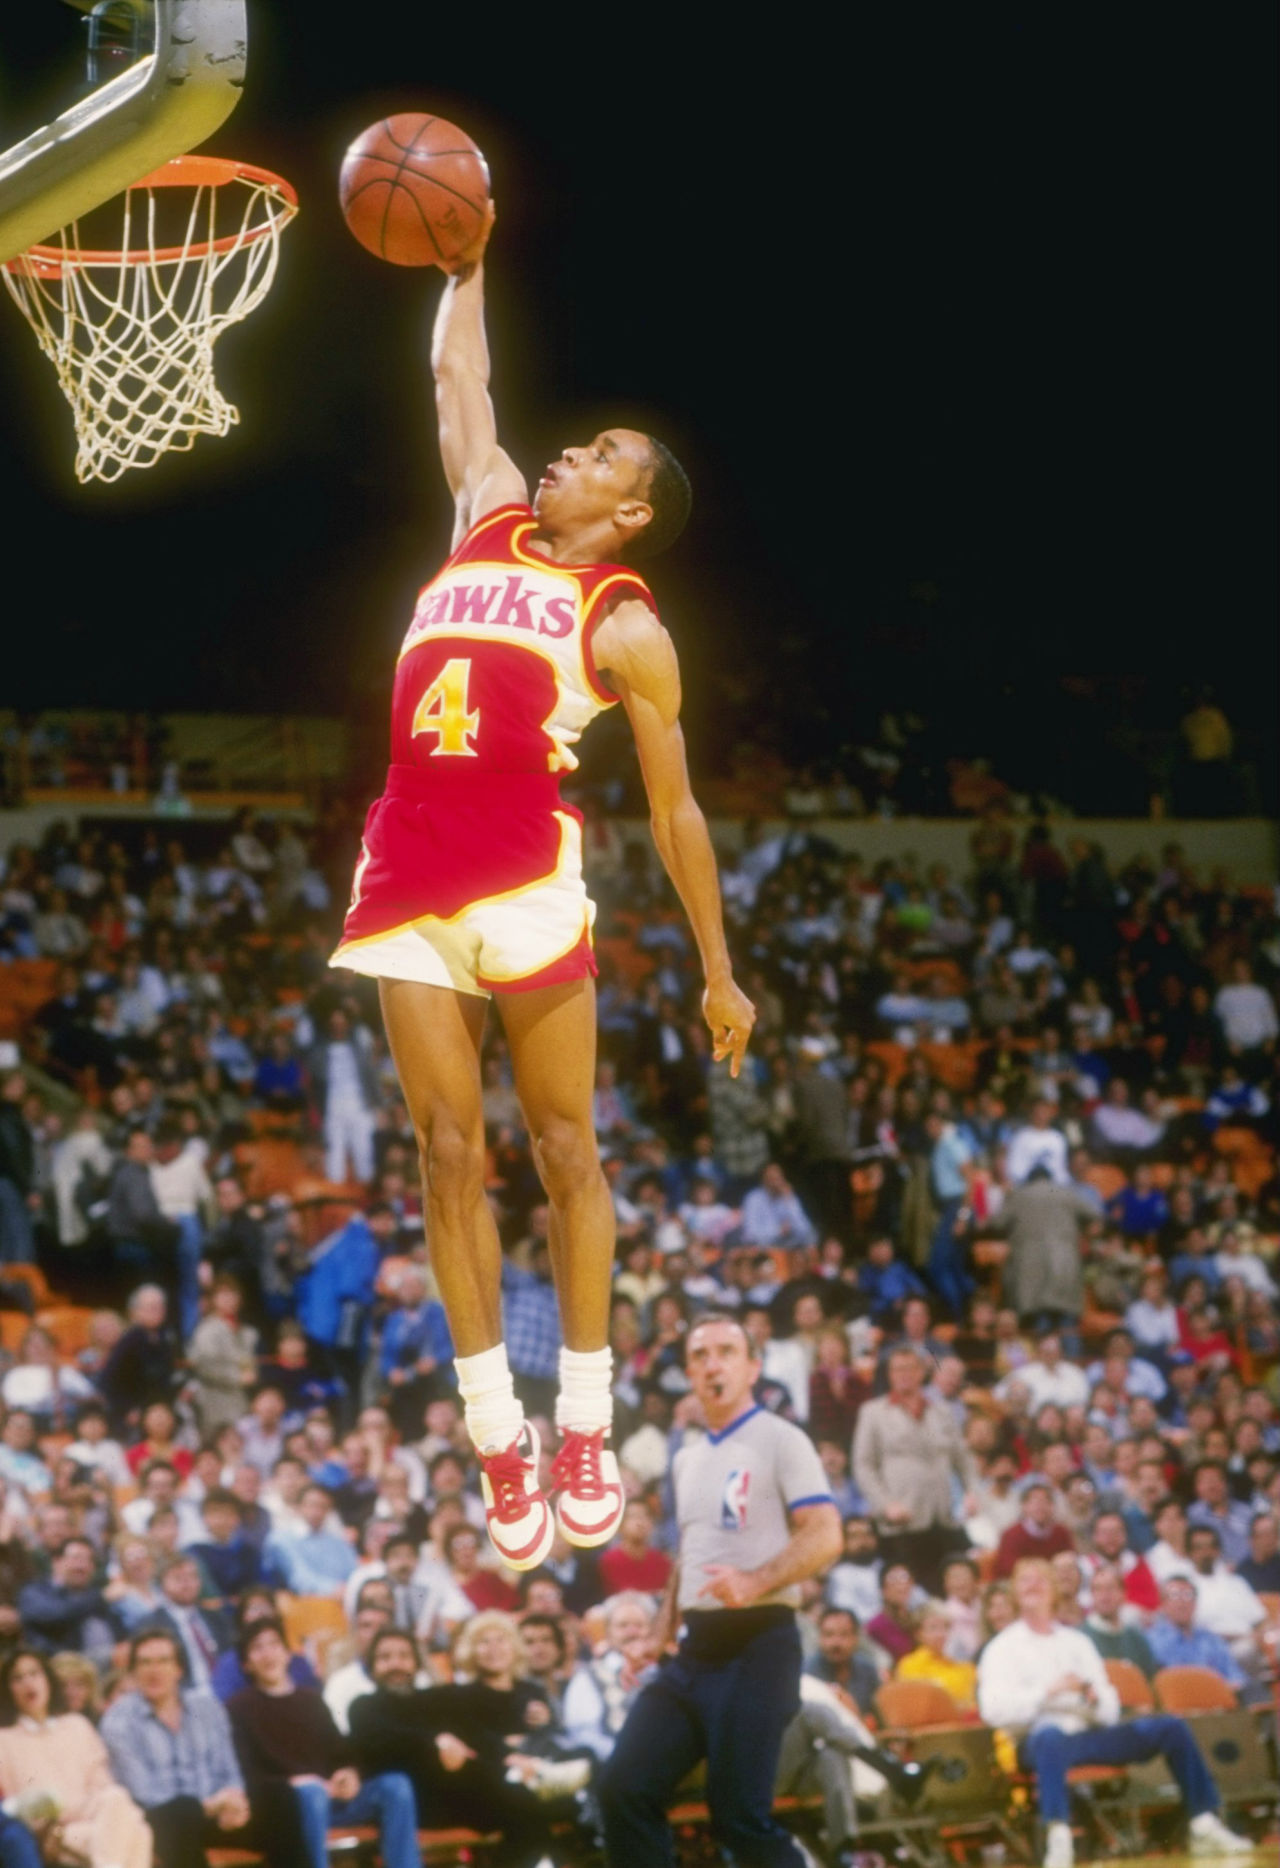 Guard Anthony "Spud" Webb of the Atlanta Hawks leaps to victory during a game against the Los Angeles Lakers at The Forum in Inglewood, California. (Stephen Dunn/Allsport via Getty Images)